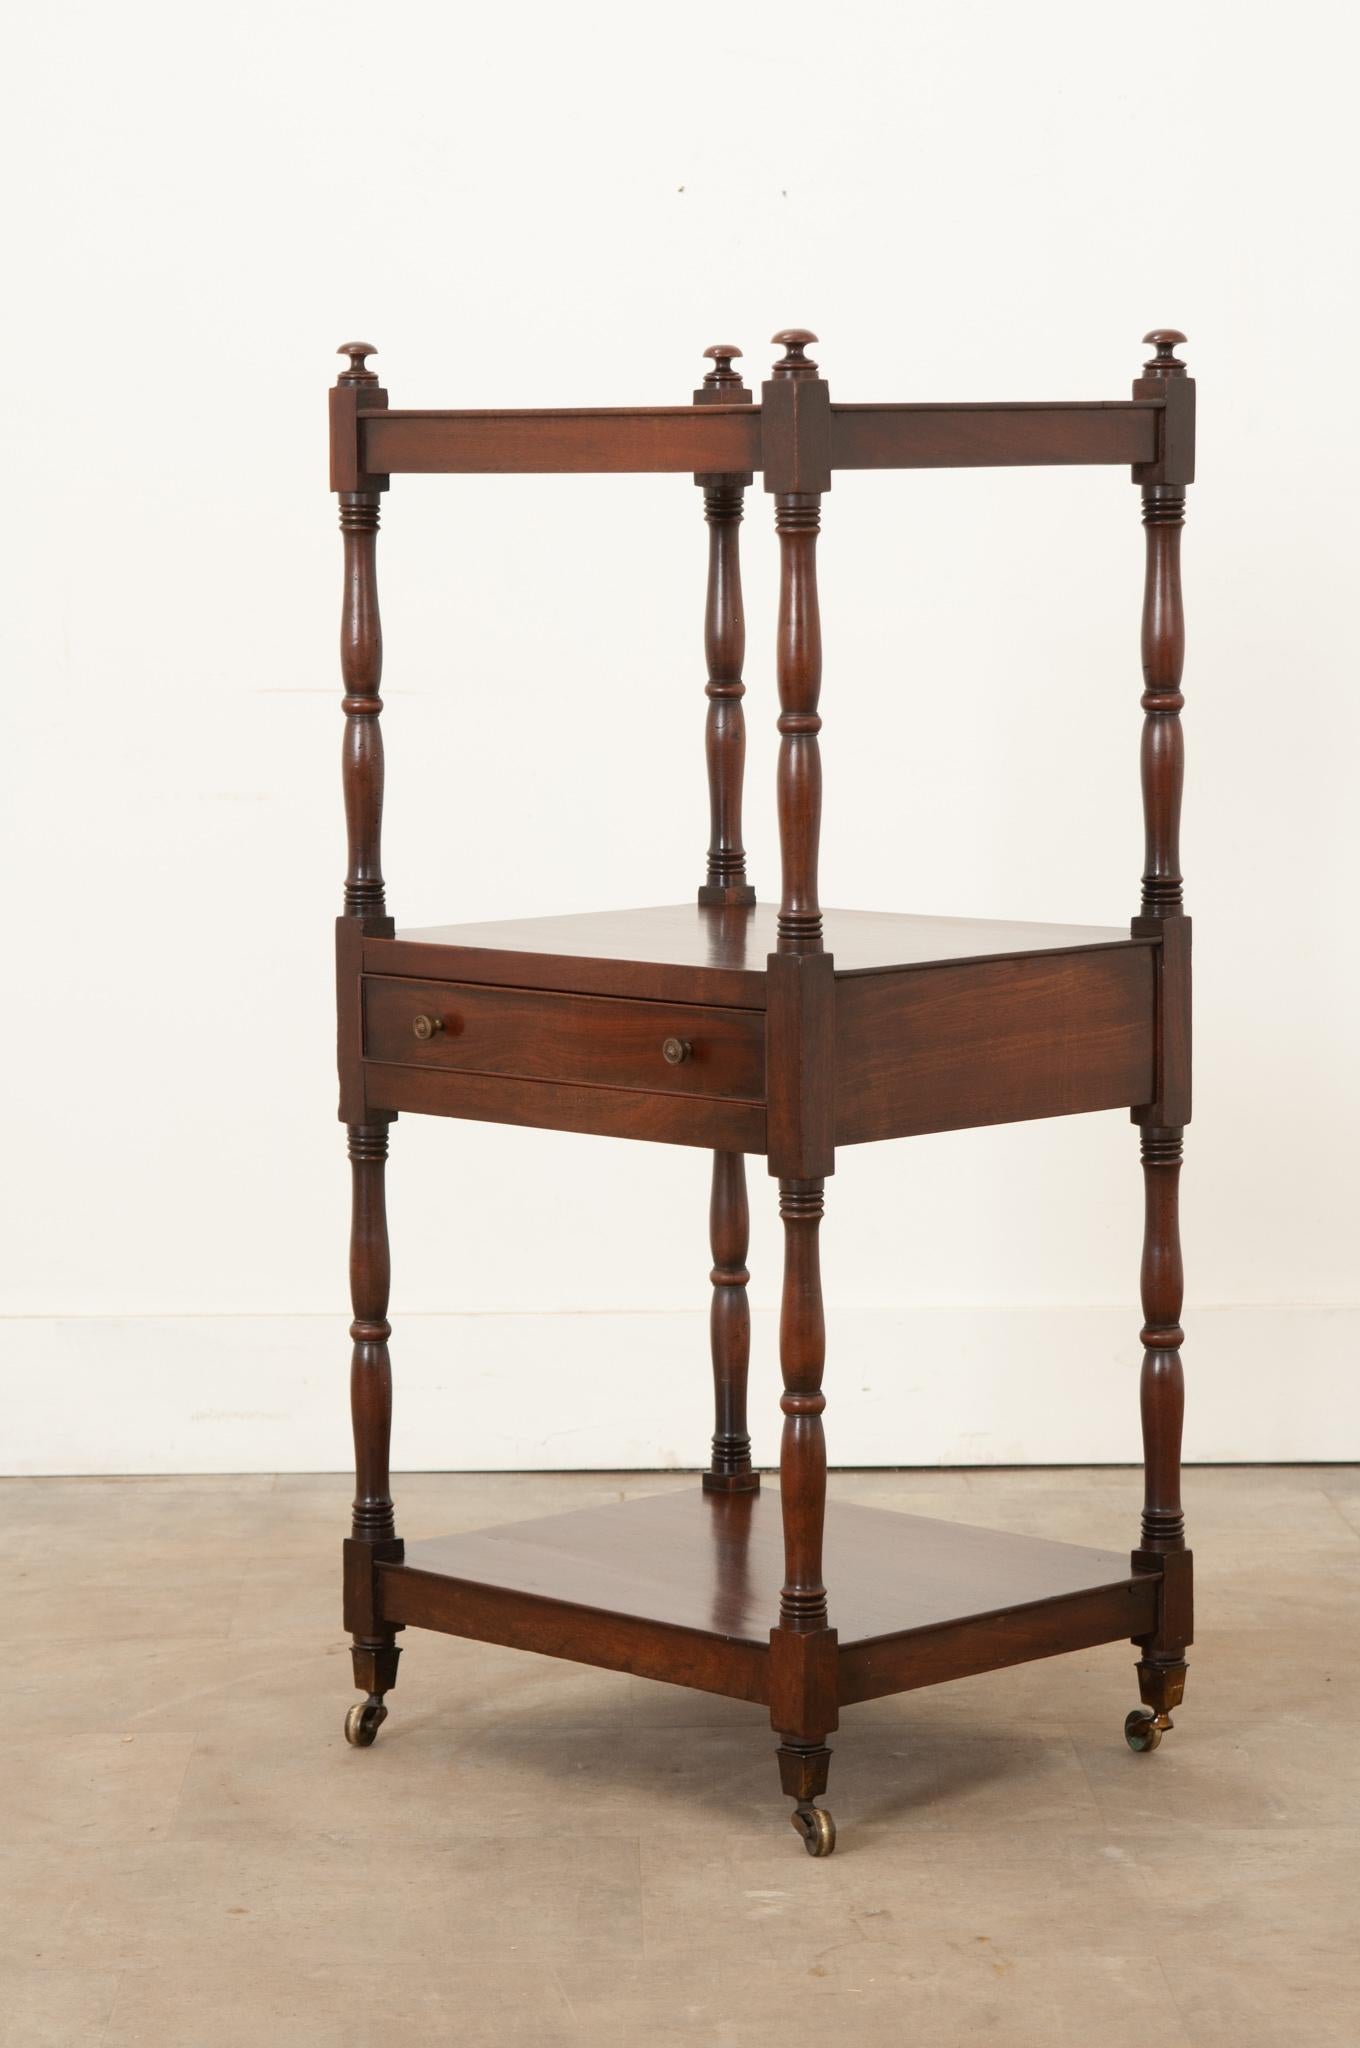 A 19th century English mahogany etagere that features 3 well-spaced shelves and elegant hand-carved spool shaped supports. The top showcases a distinctive wood grain and the piece is polished with French wax paste to revitalize its warm tone. A